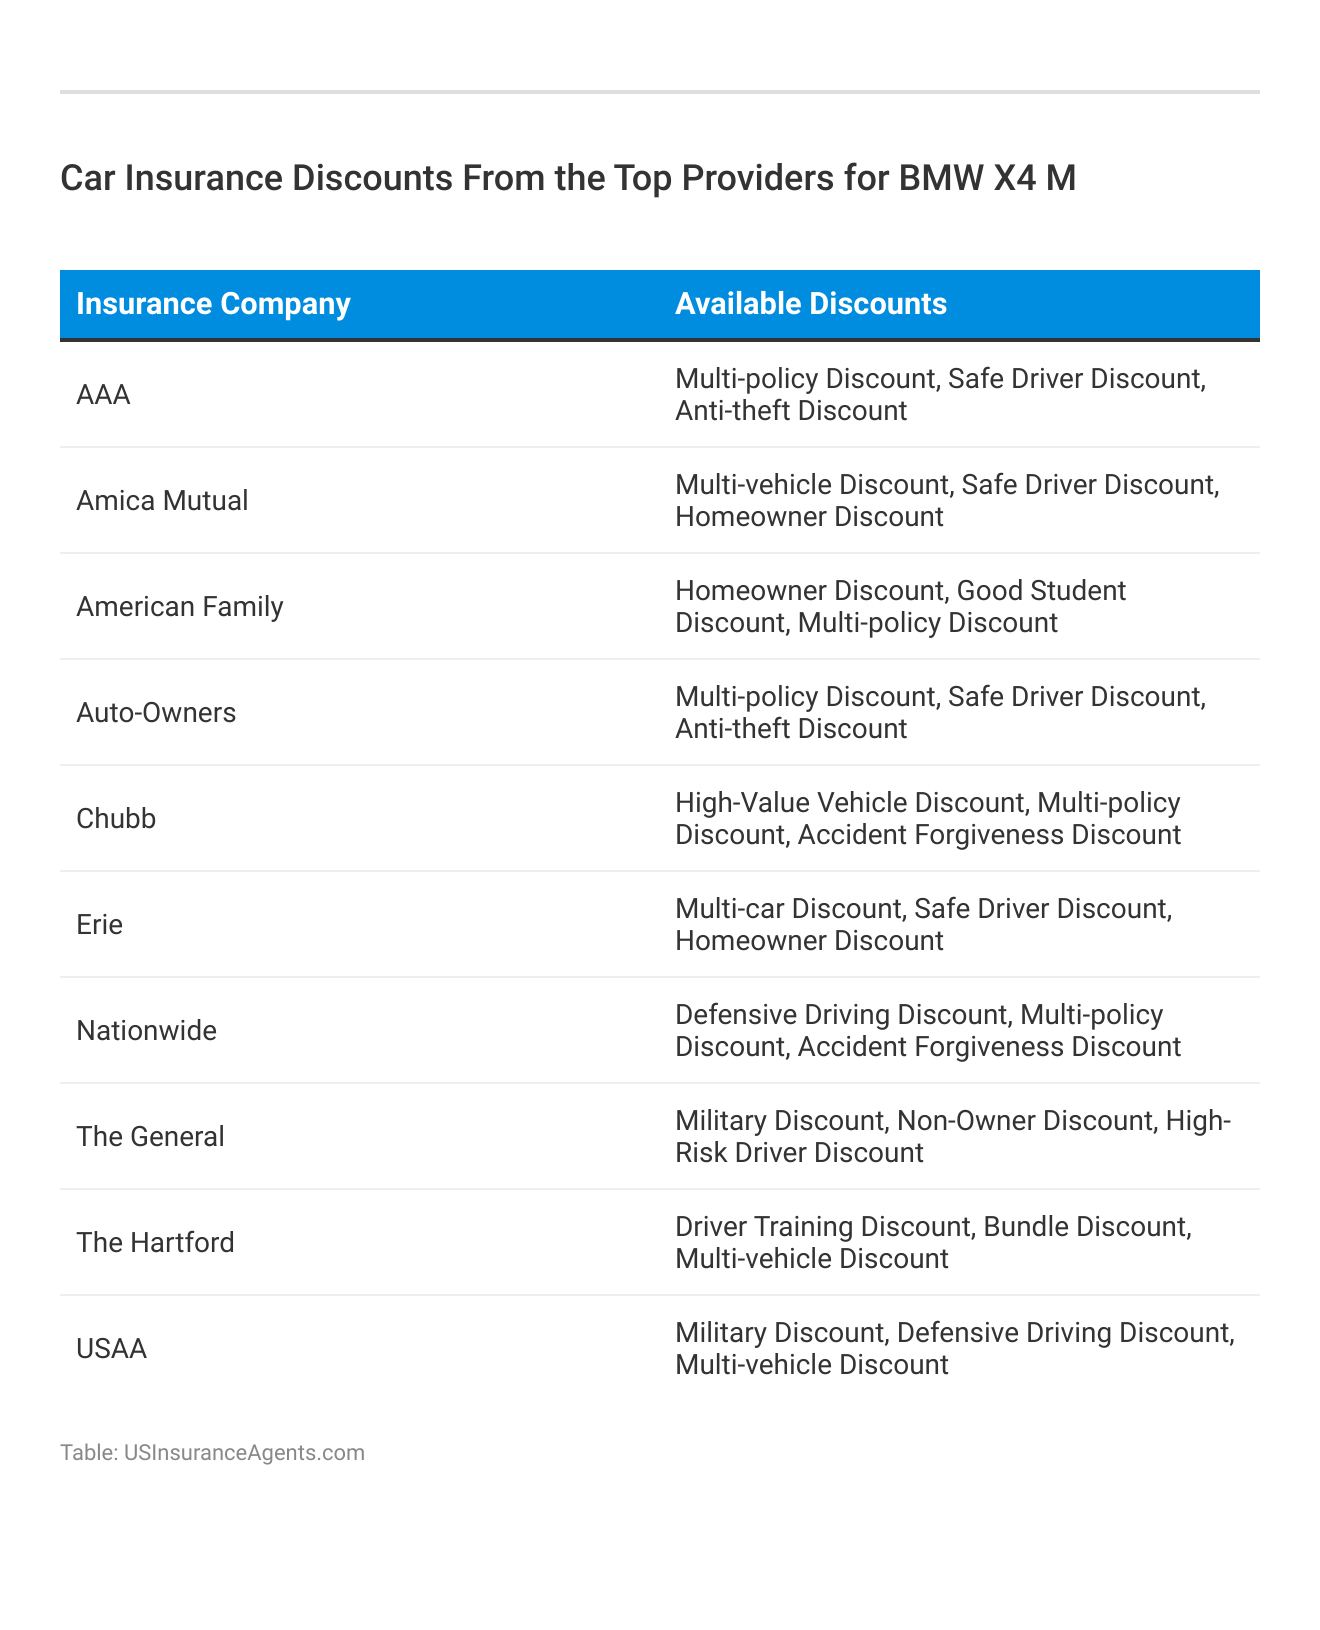 <h3>Car Insurance Discounts From the Top Providers for BMW X4 M</h3>